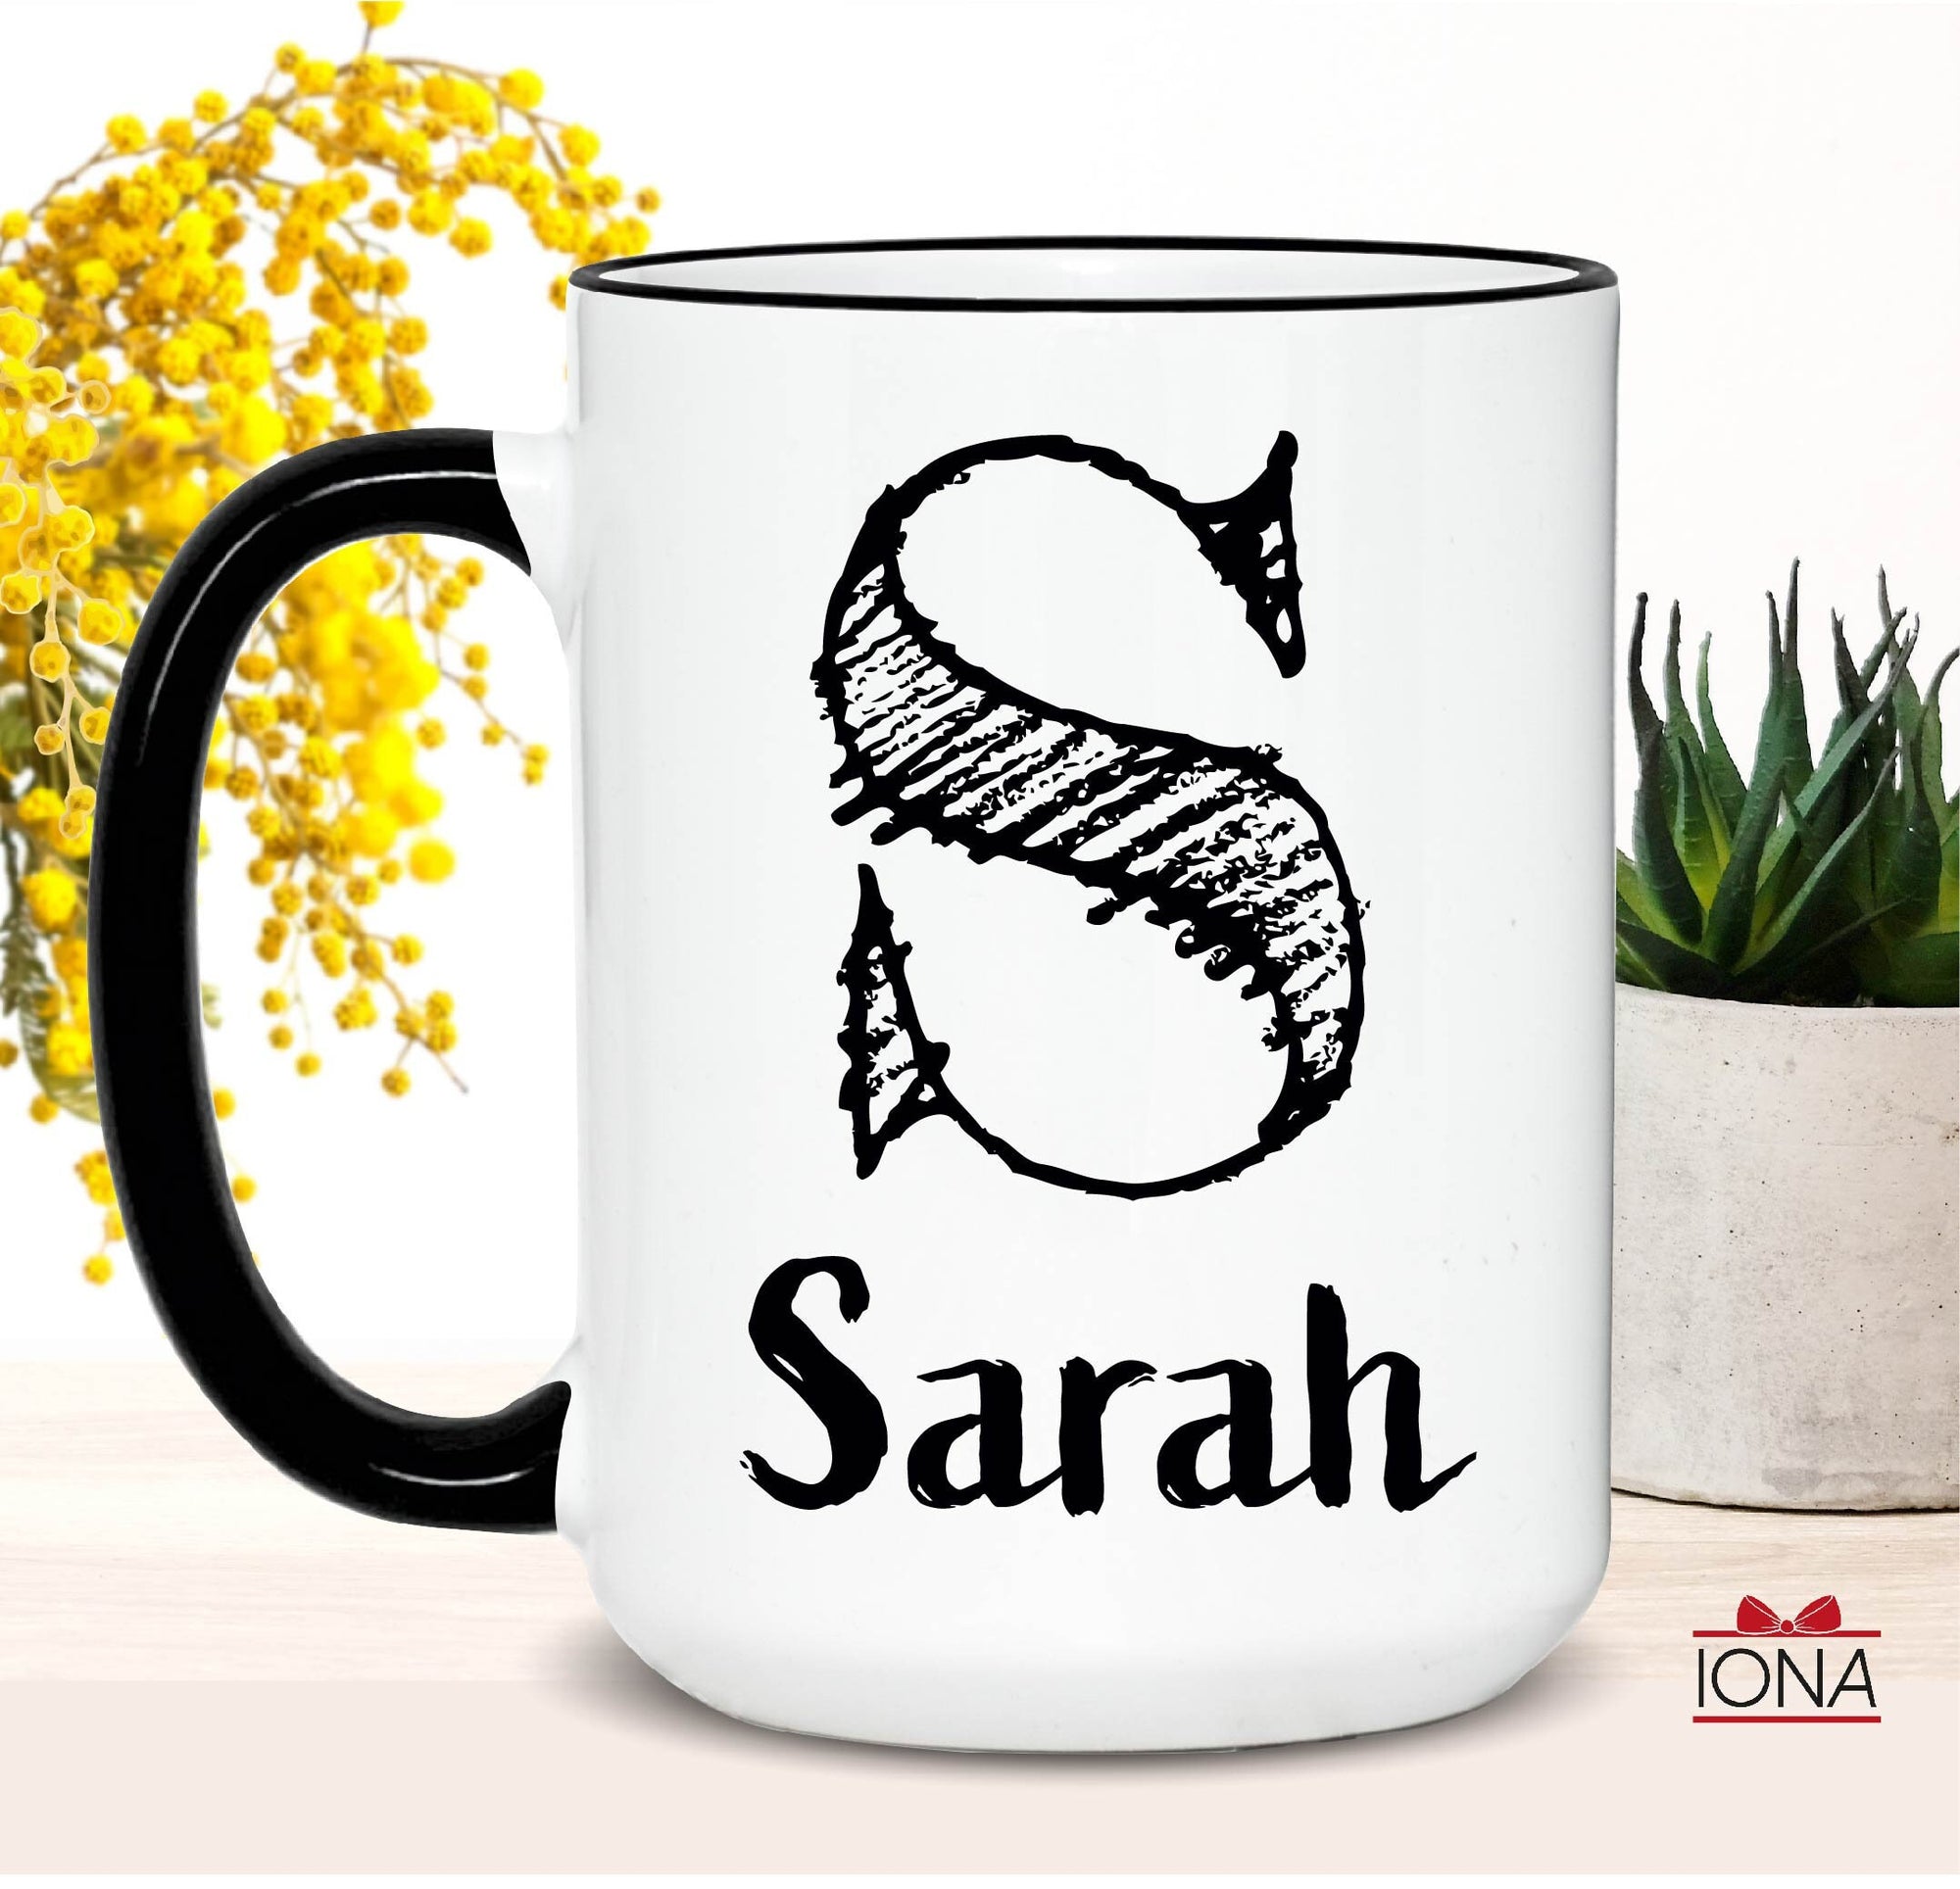 Personalized Name Mug, Gift for Women, Men, Coffee Cup with Custom Name and Monogram, Personalized Coffee Mug, Initial and Name, Office Mug